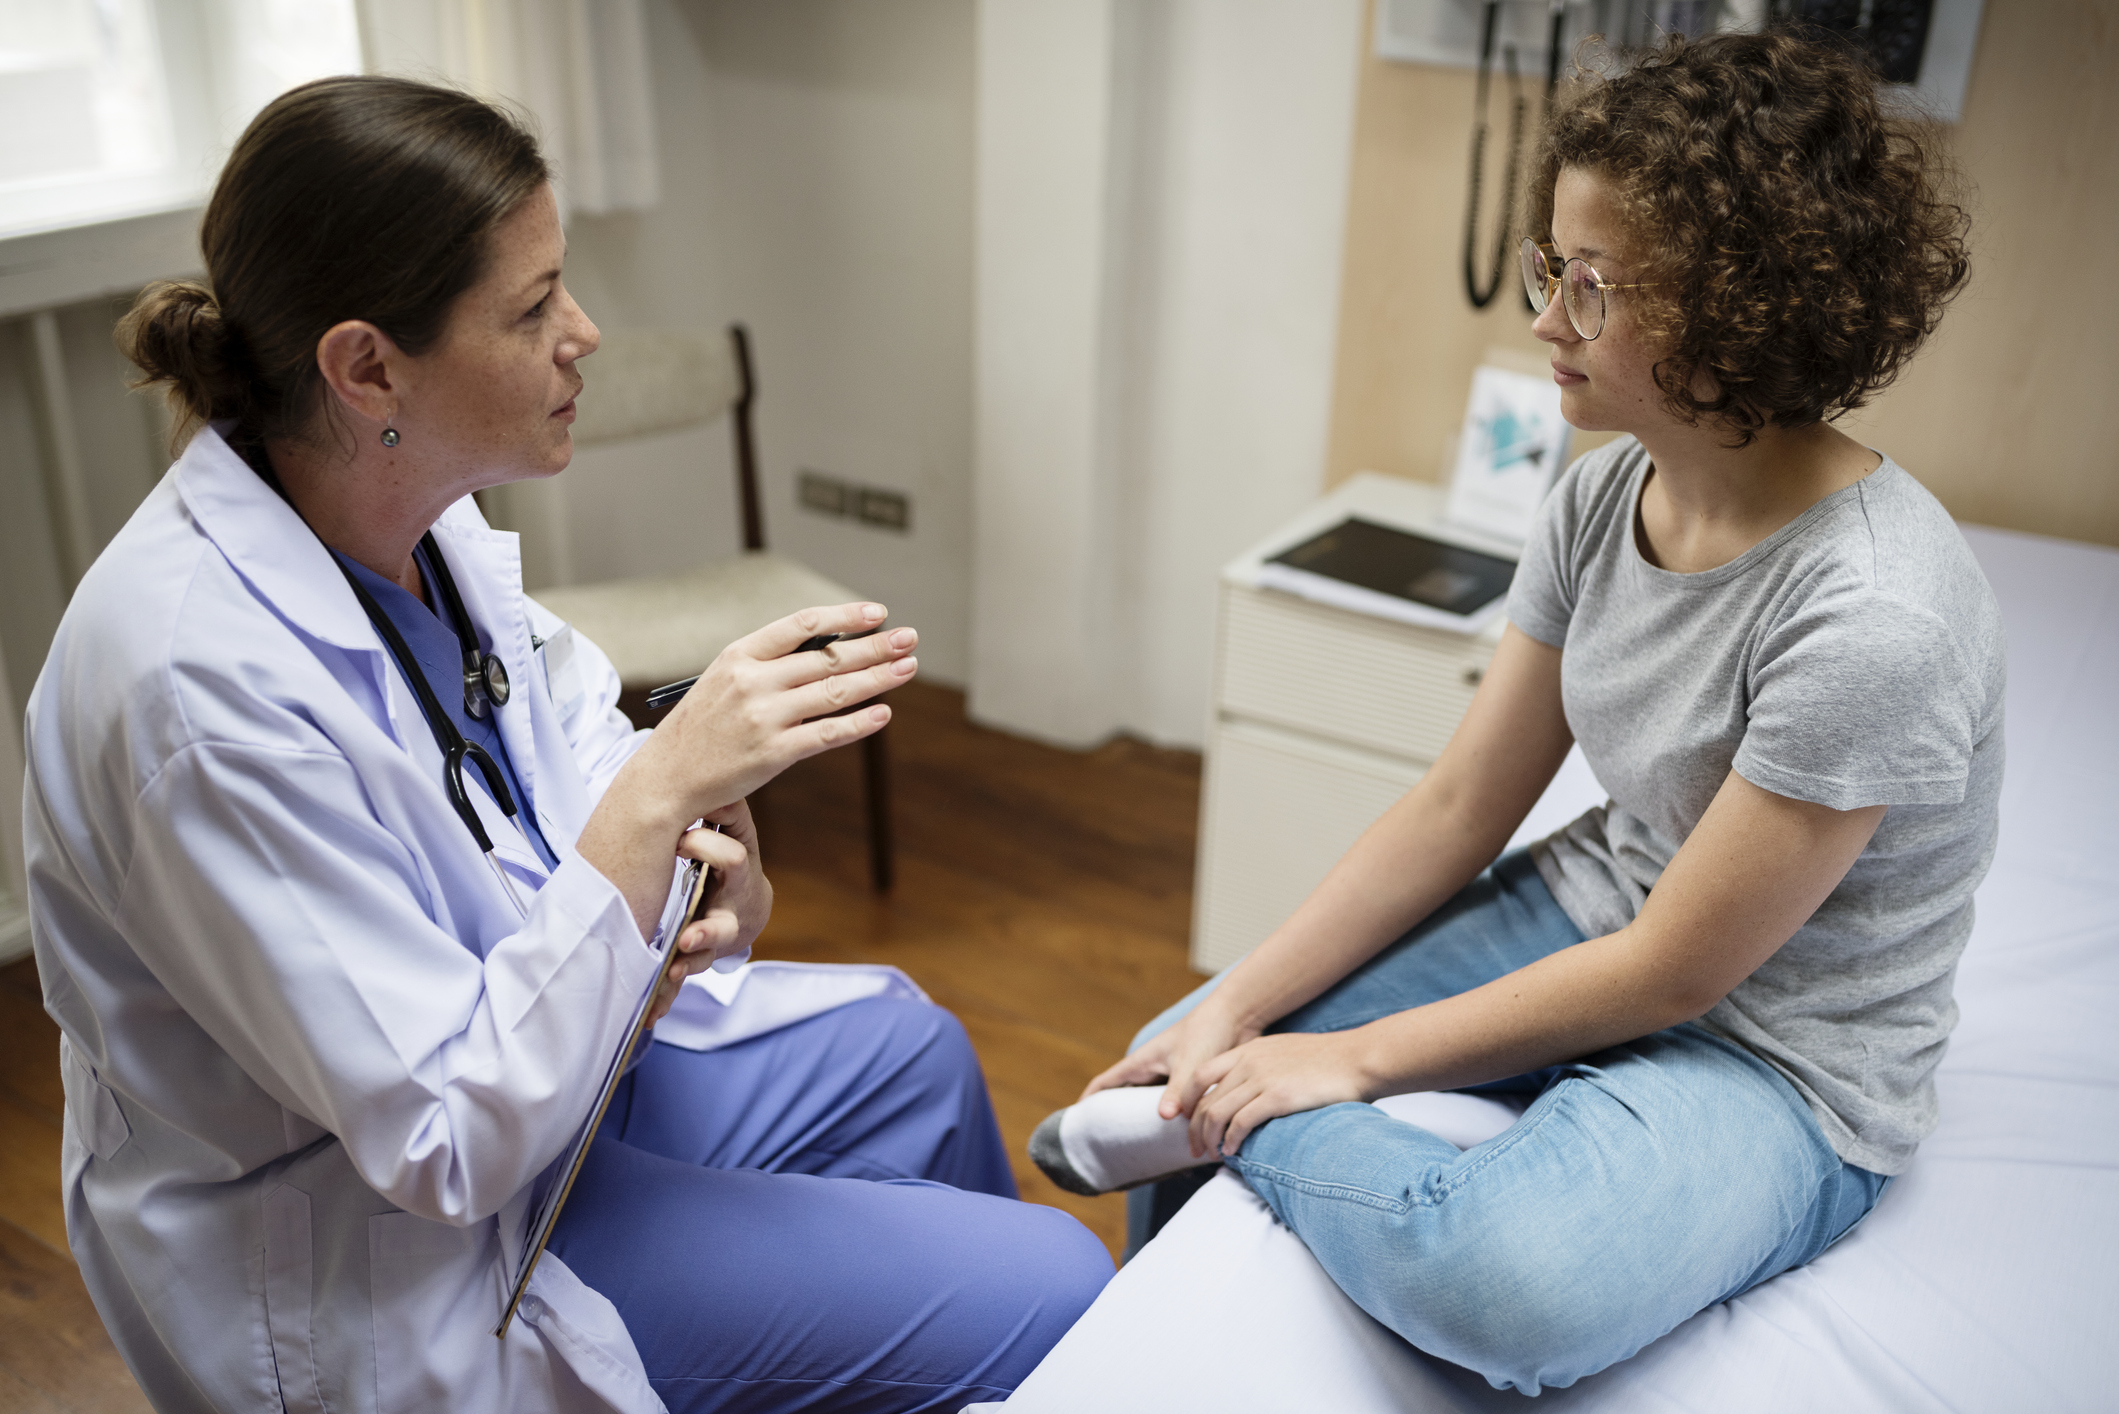 Female girl talking with female physician